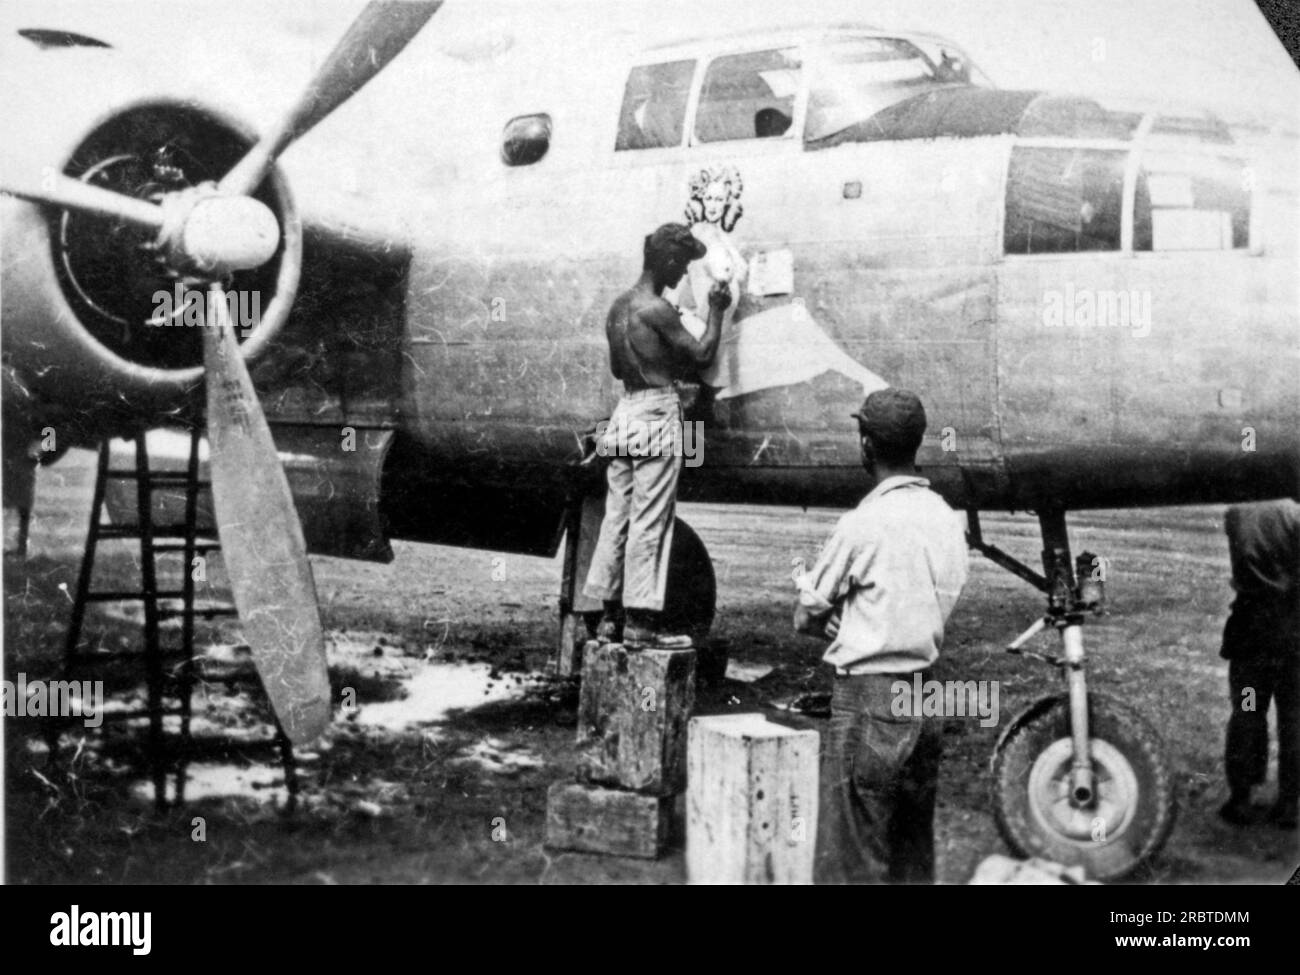 Australia:  c. 1943 A 5th AAF airman artist painting a pin-up on the nose of a B-25 bomber of the 80th Bomber Group stationed in Australia. Stock Photo